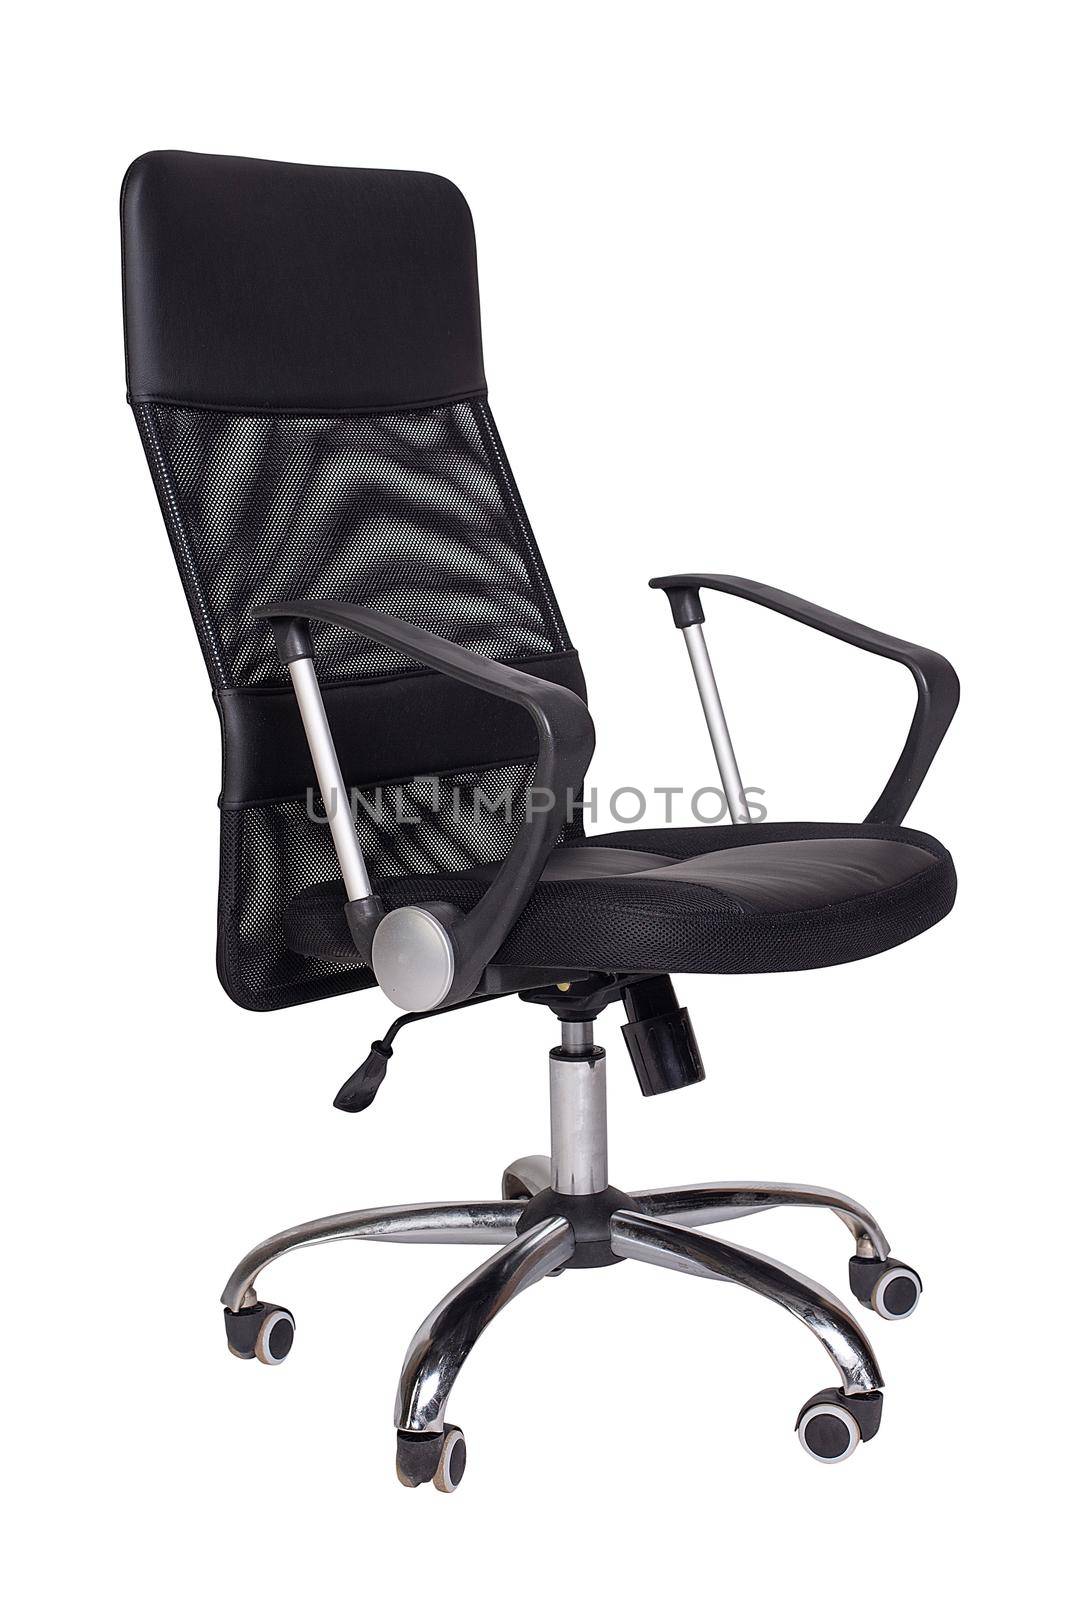 Black office armchair isolated on white background